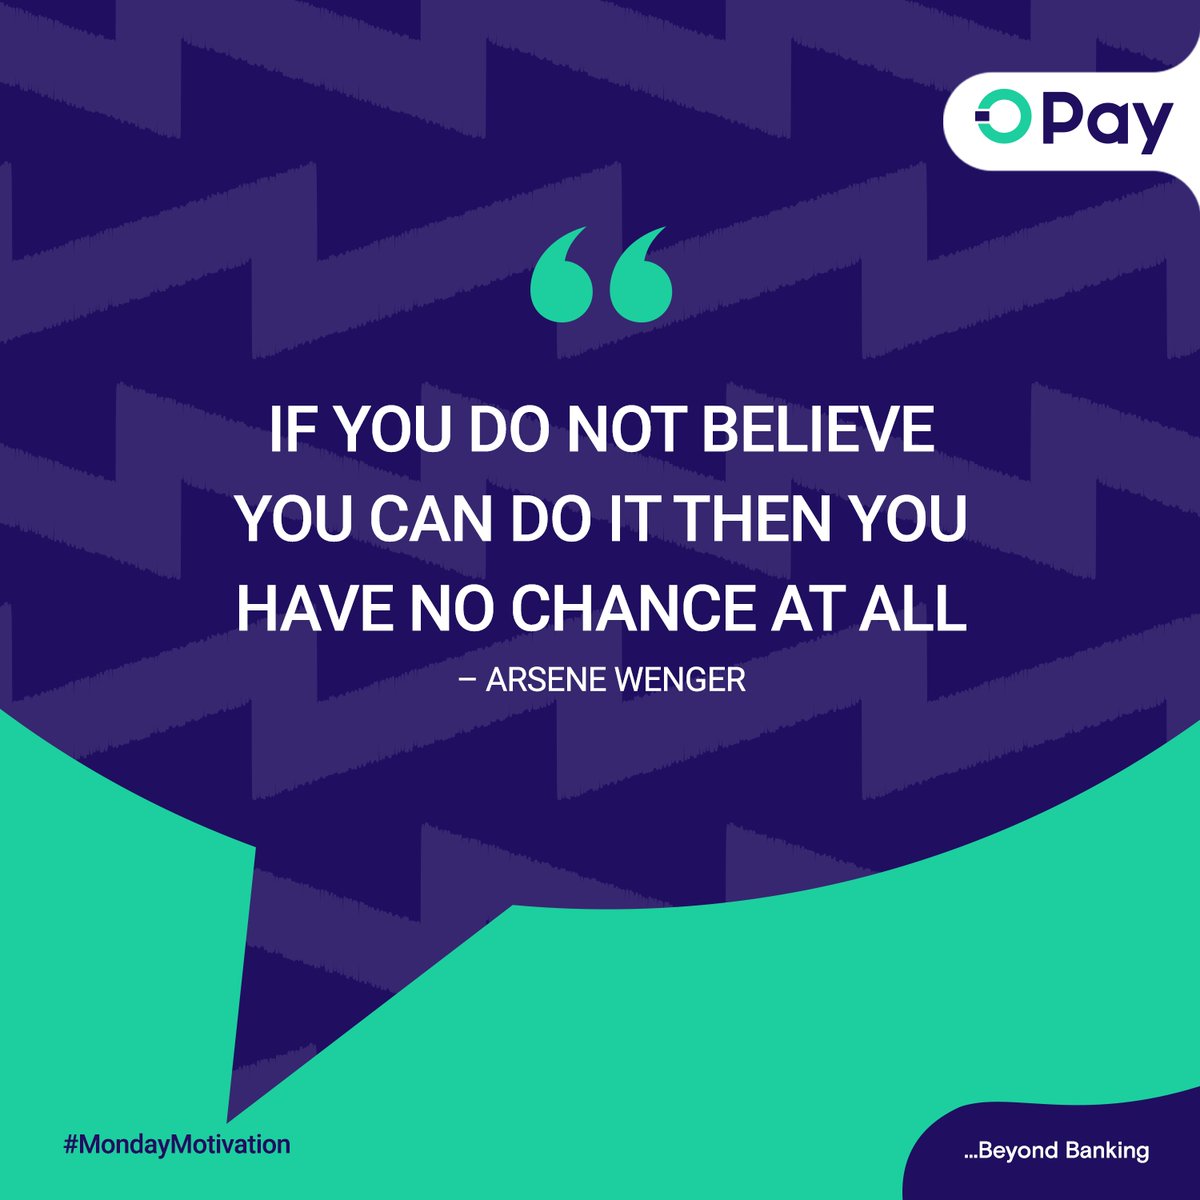 Believe you can and you are halfway to success. This new week, trust in your inner power to do amazing things.  

#OPayBeyondBanking #opayat5